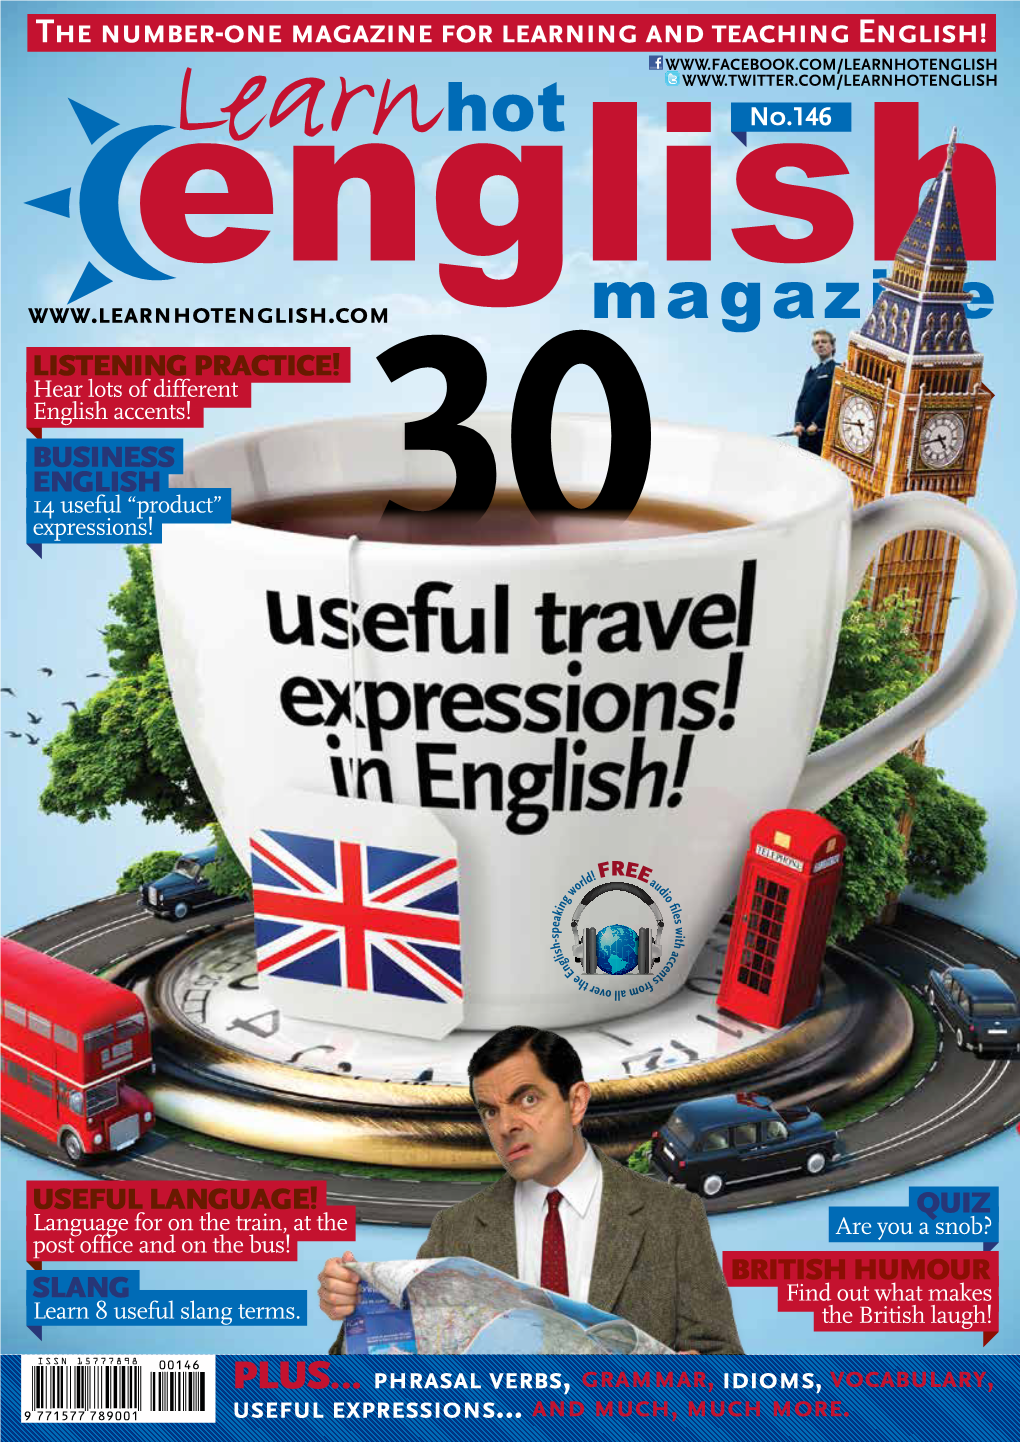 The Number-One Magazine for Learning and Teaching English! No.146